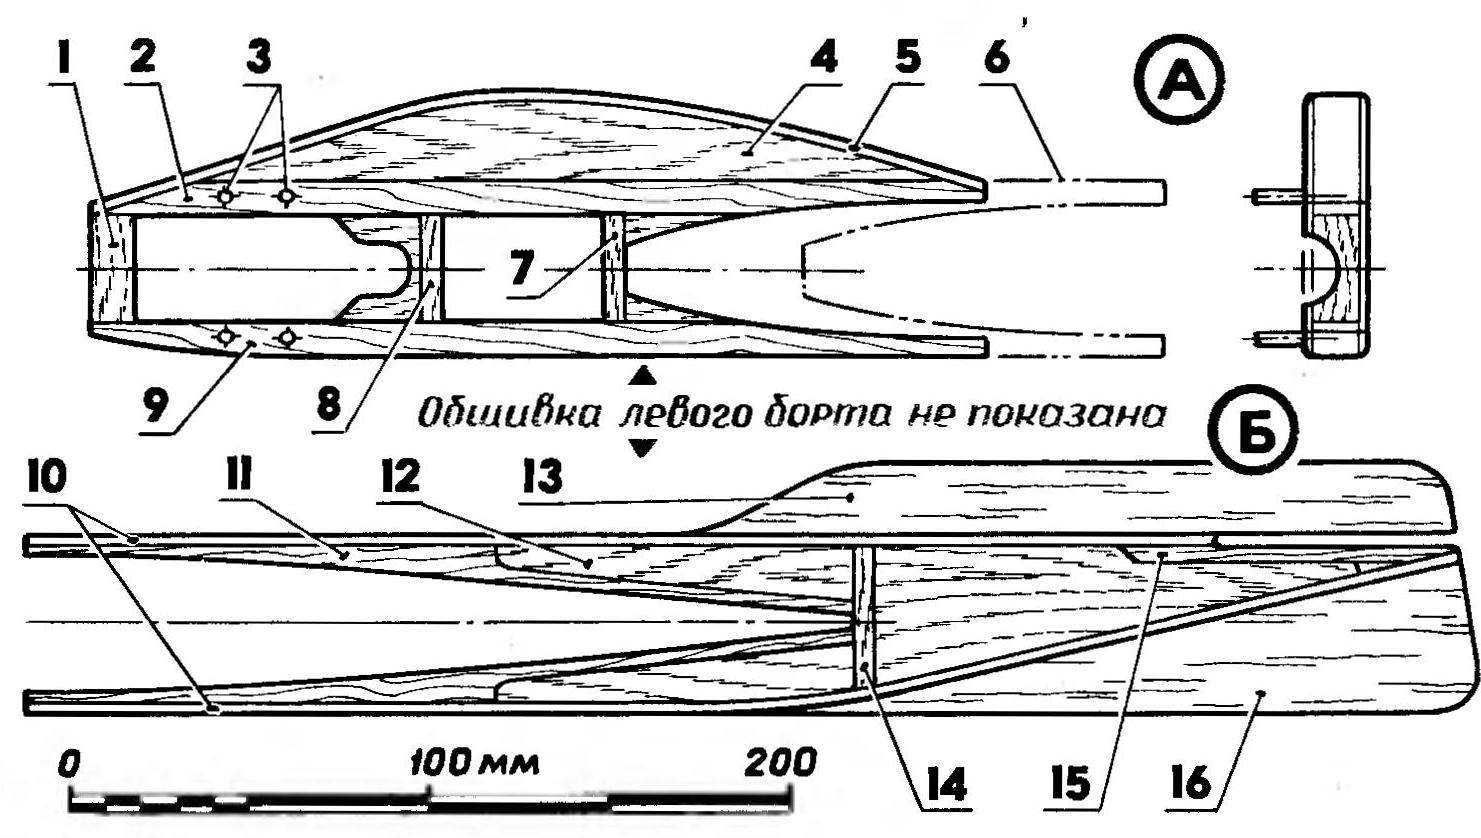 Fuselage (A — nose, B — tail)